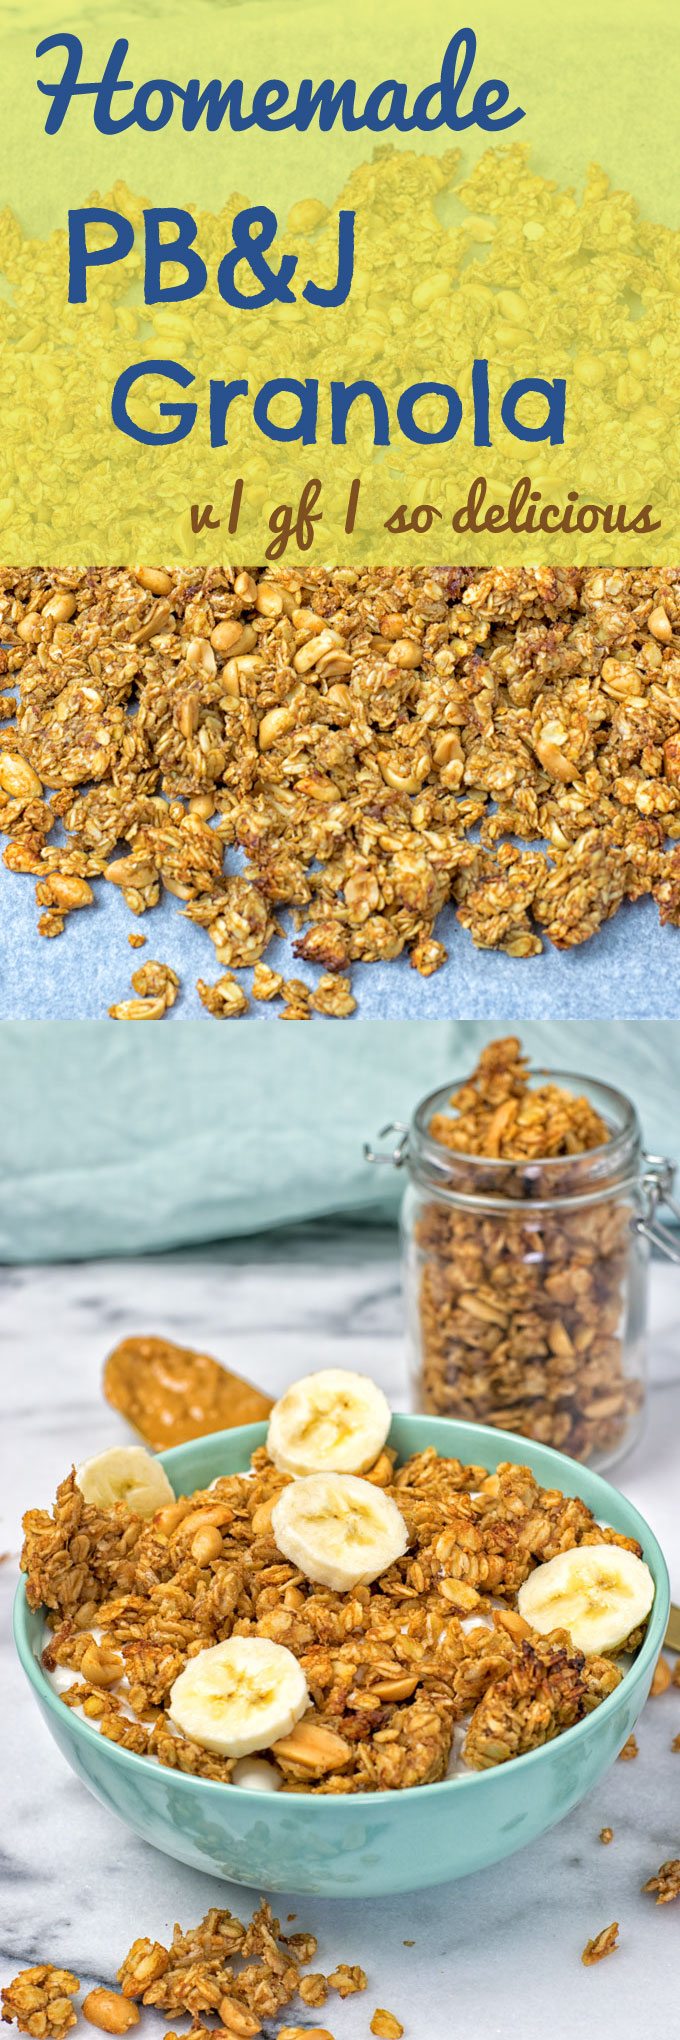 Collage of two pictures of the Homemade PB&J Granola with recipe title text.